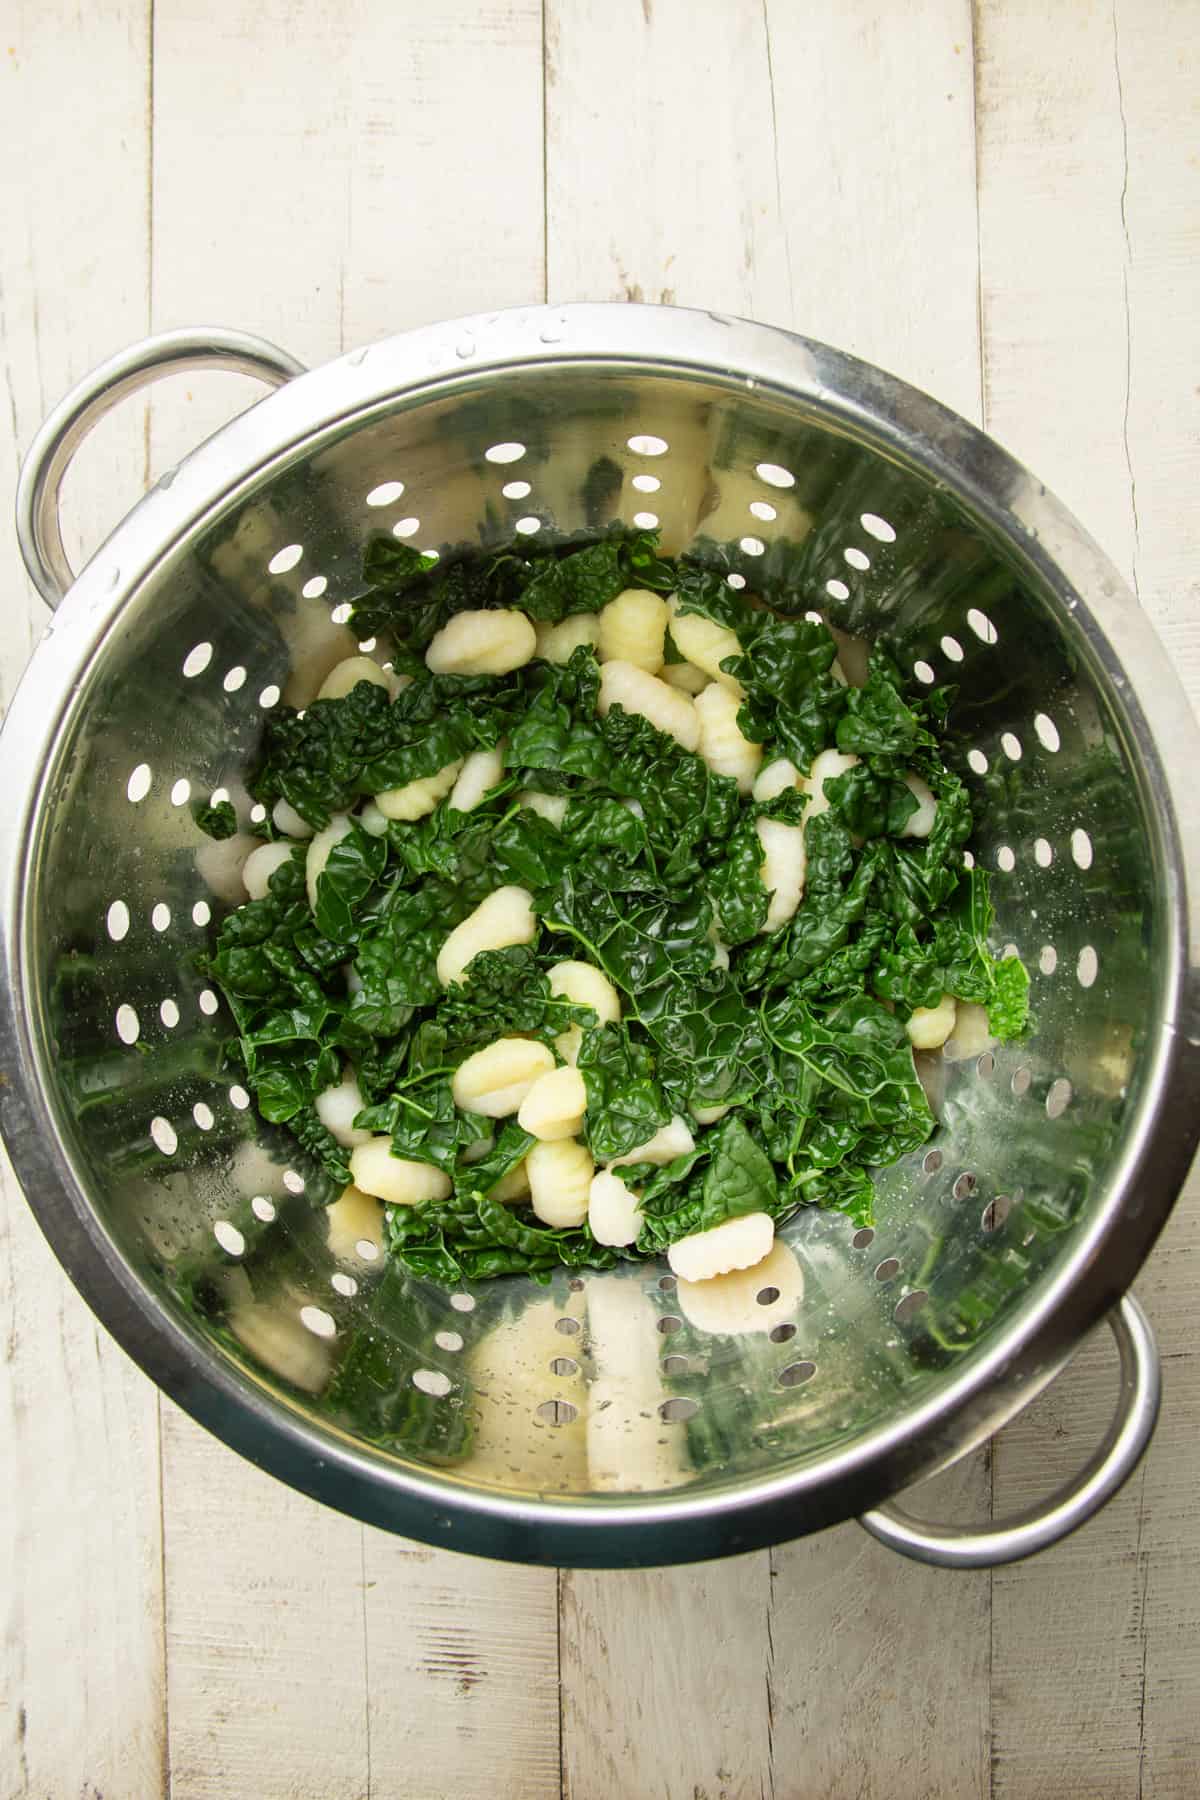 Colander filled with cooked potato gnocchi and kale.